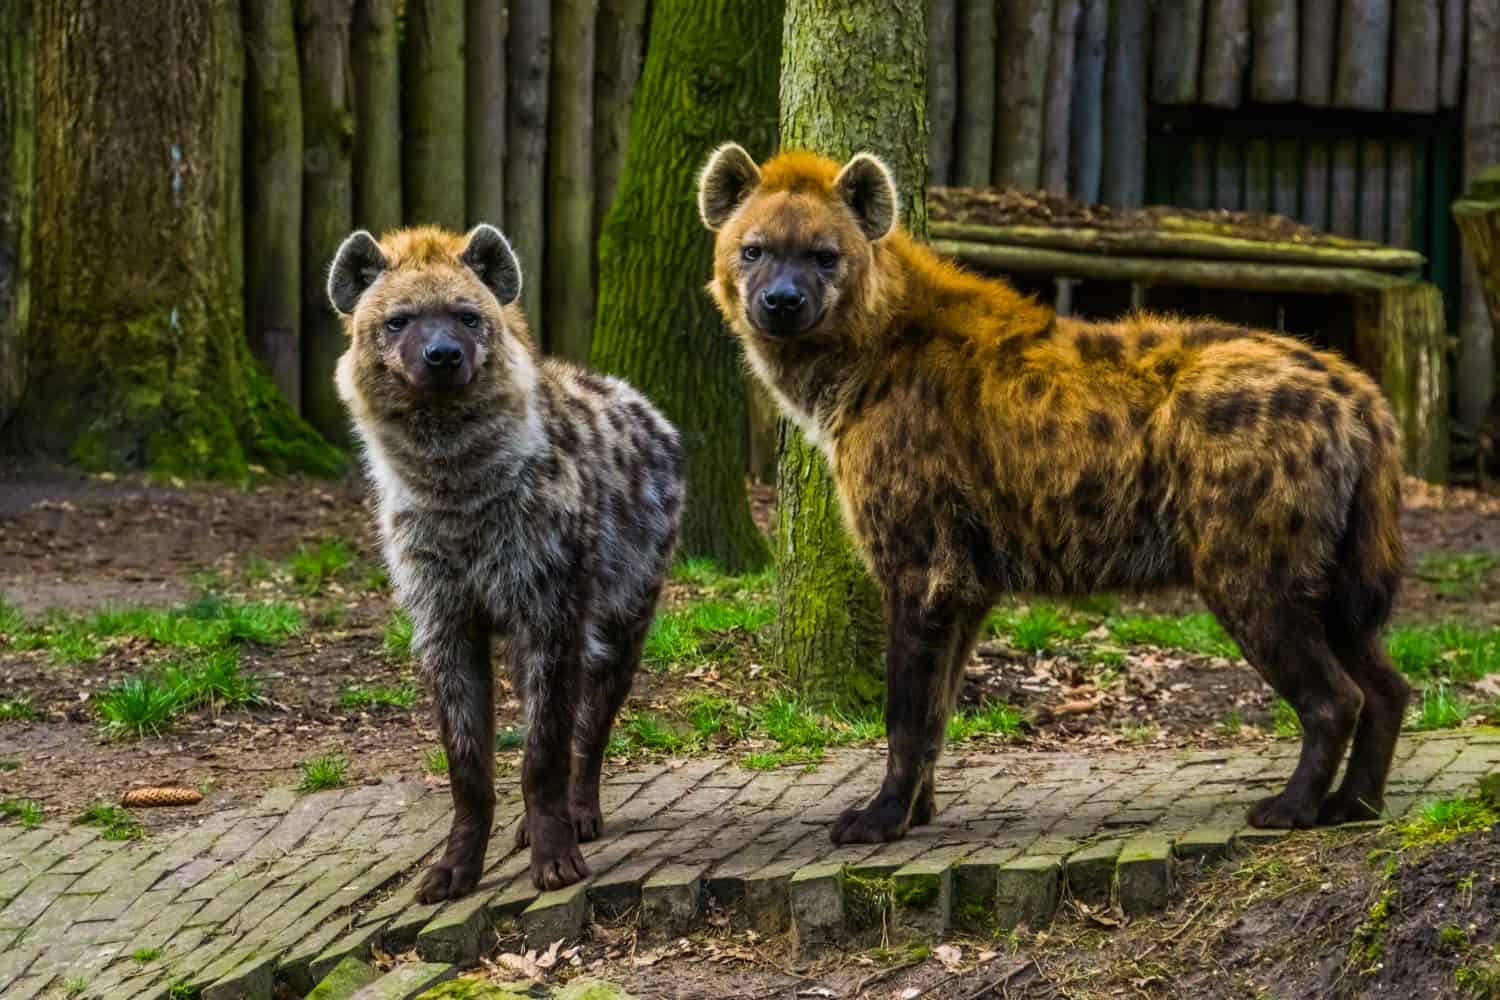 couple of spotted hyenas standing next to each other, wild carnivorous mammals from the desert of Africa